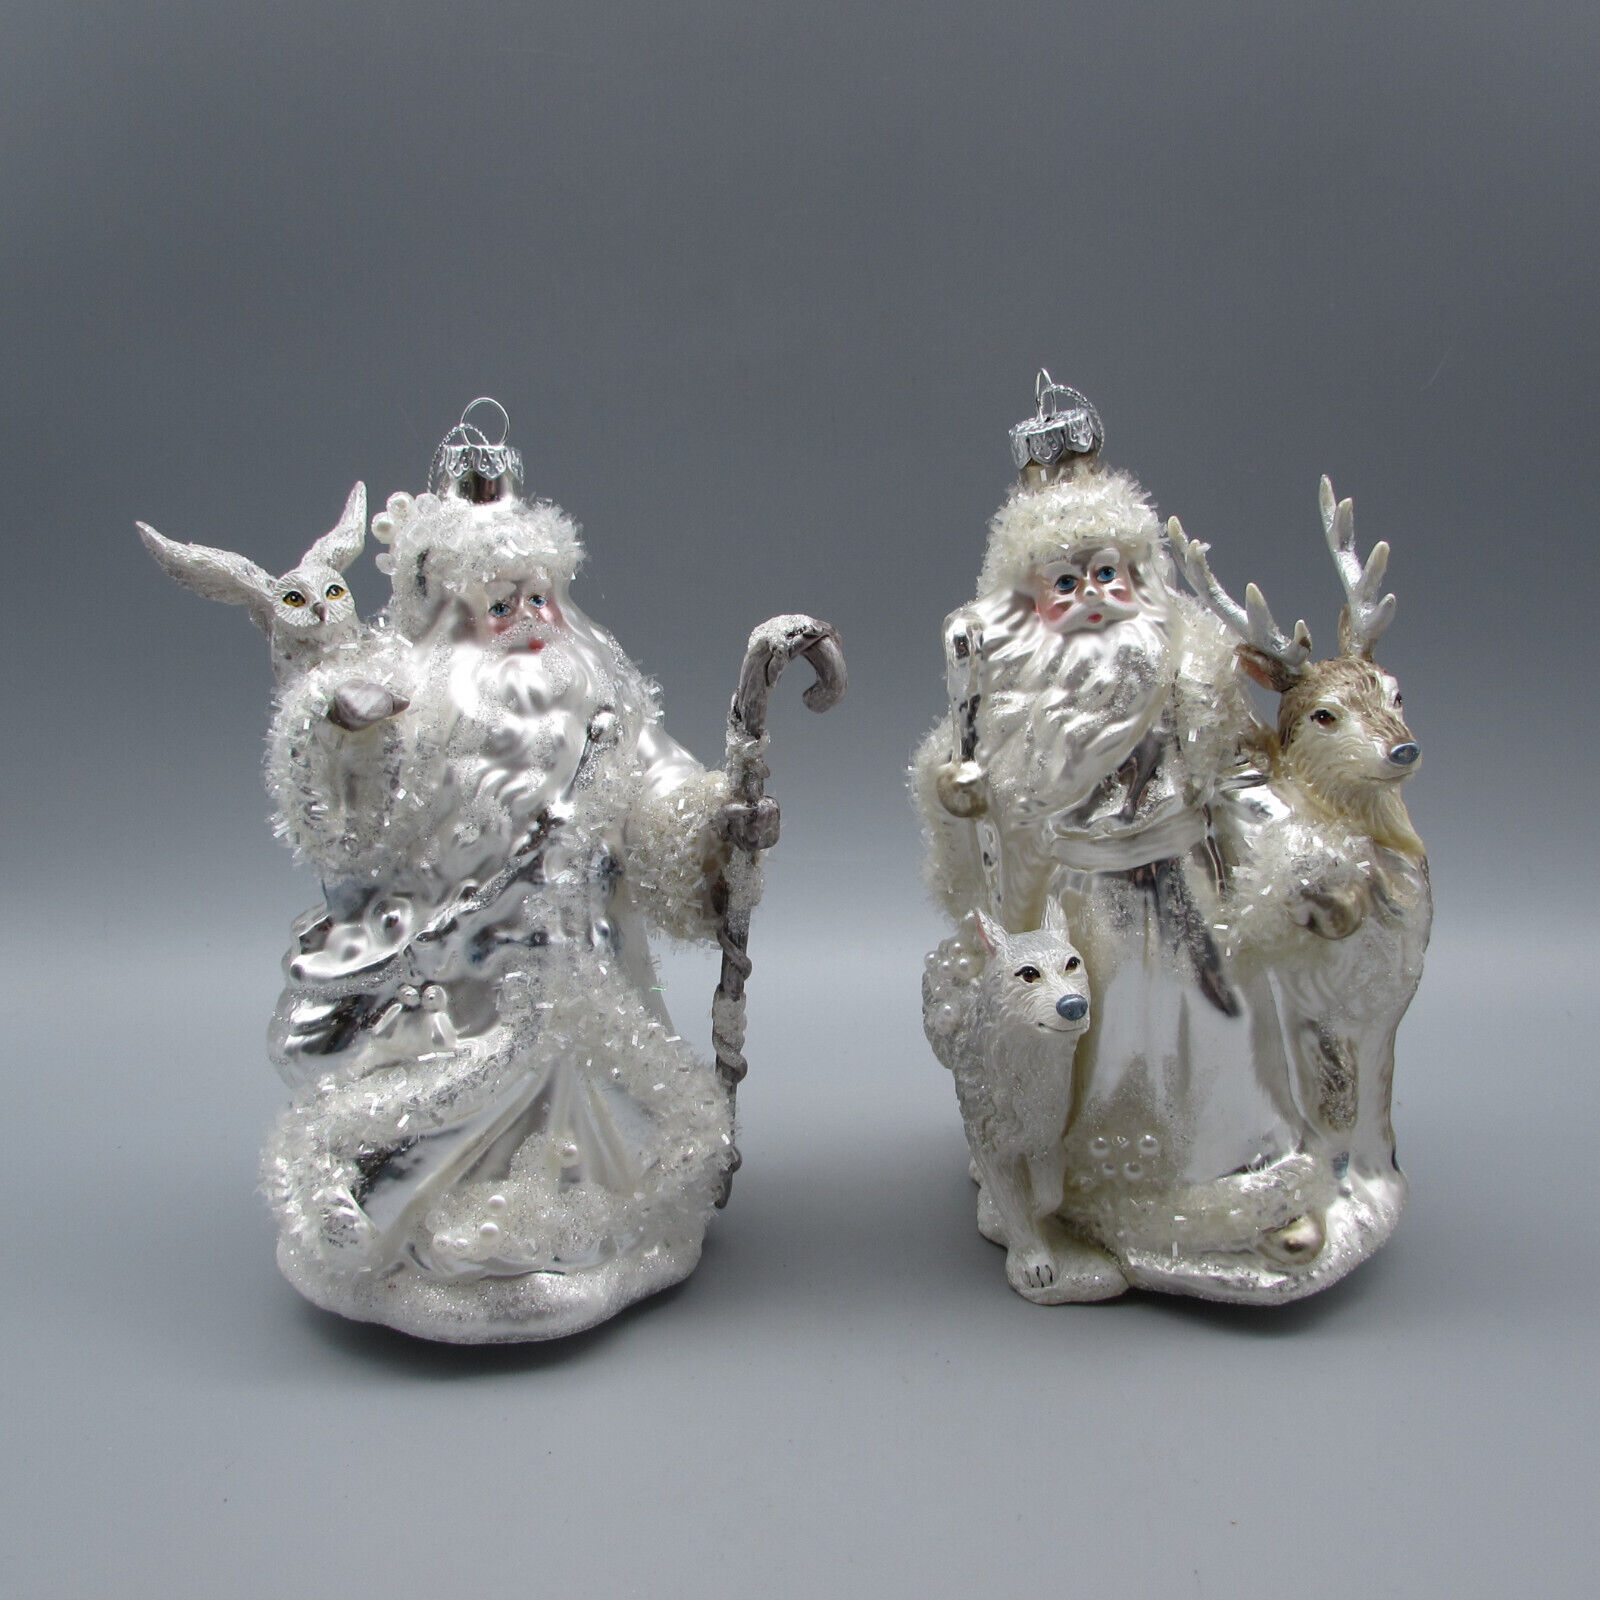 Katherines Collection Victorian Santa Christmas Ornaments - Set of Two